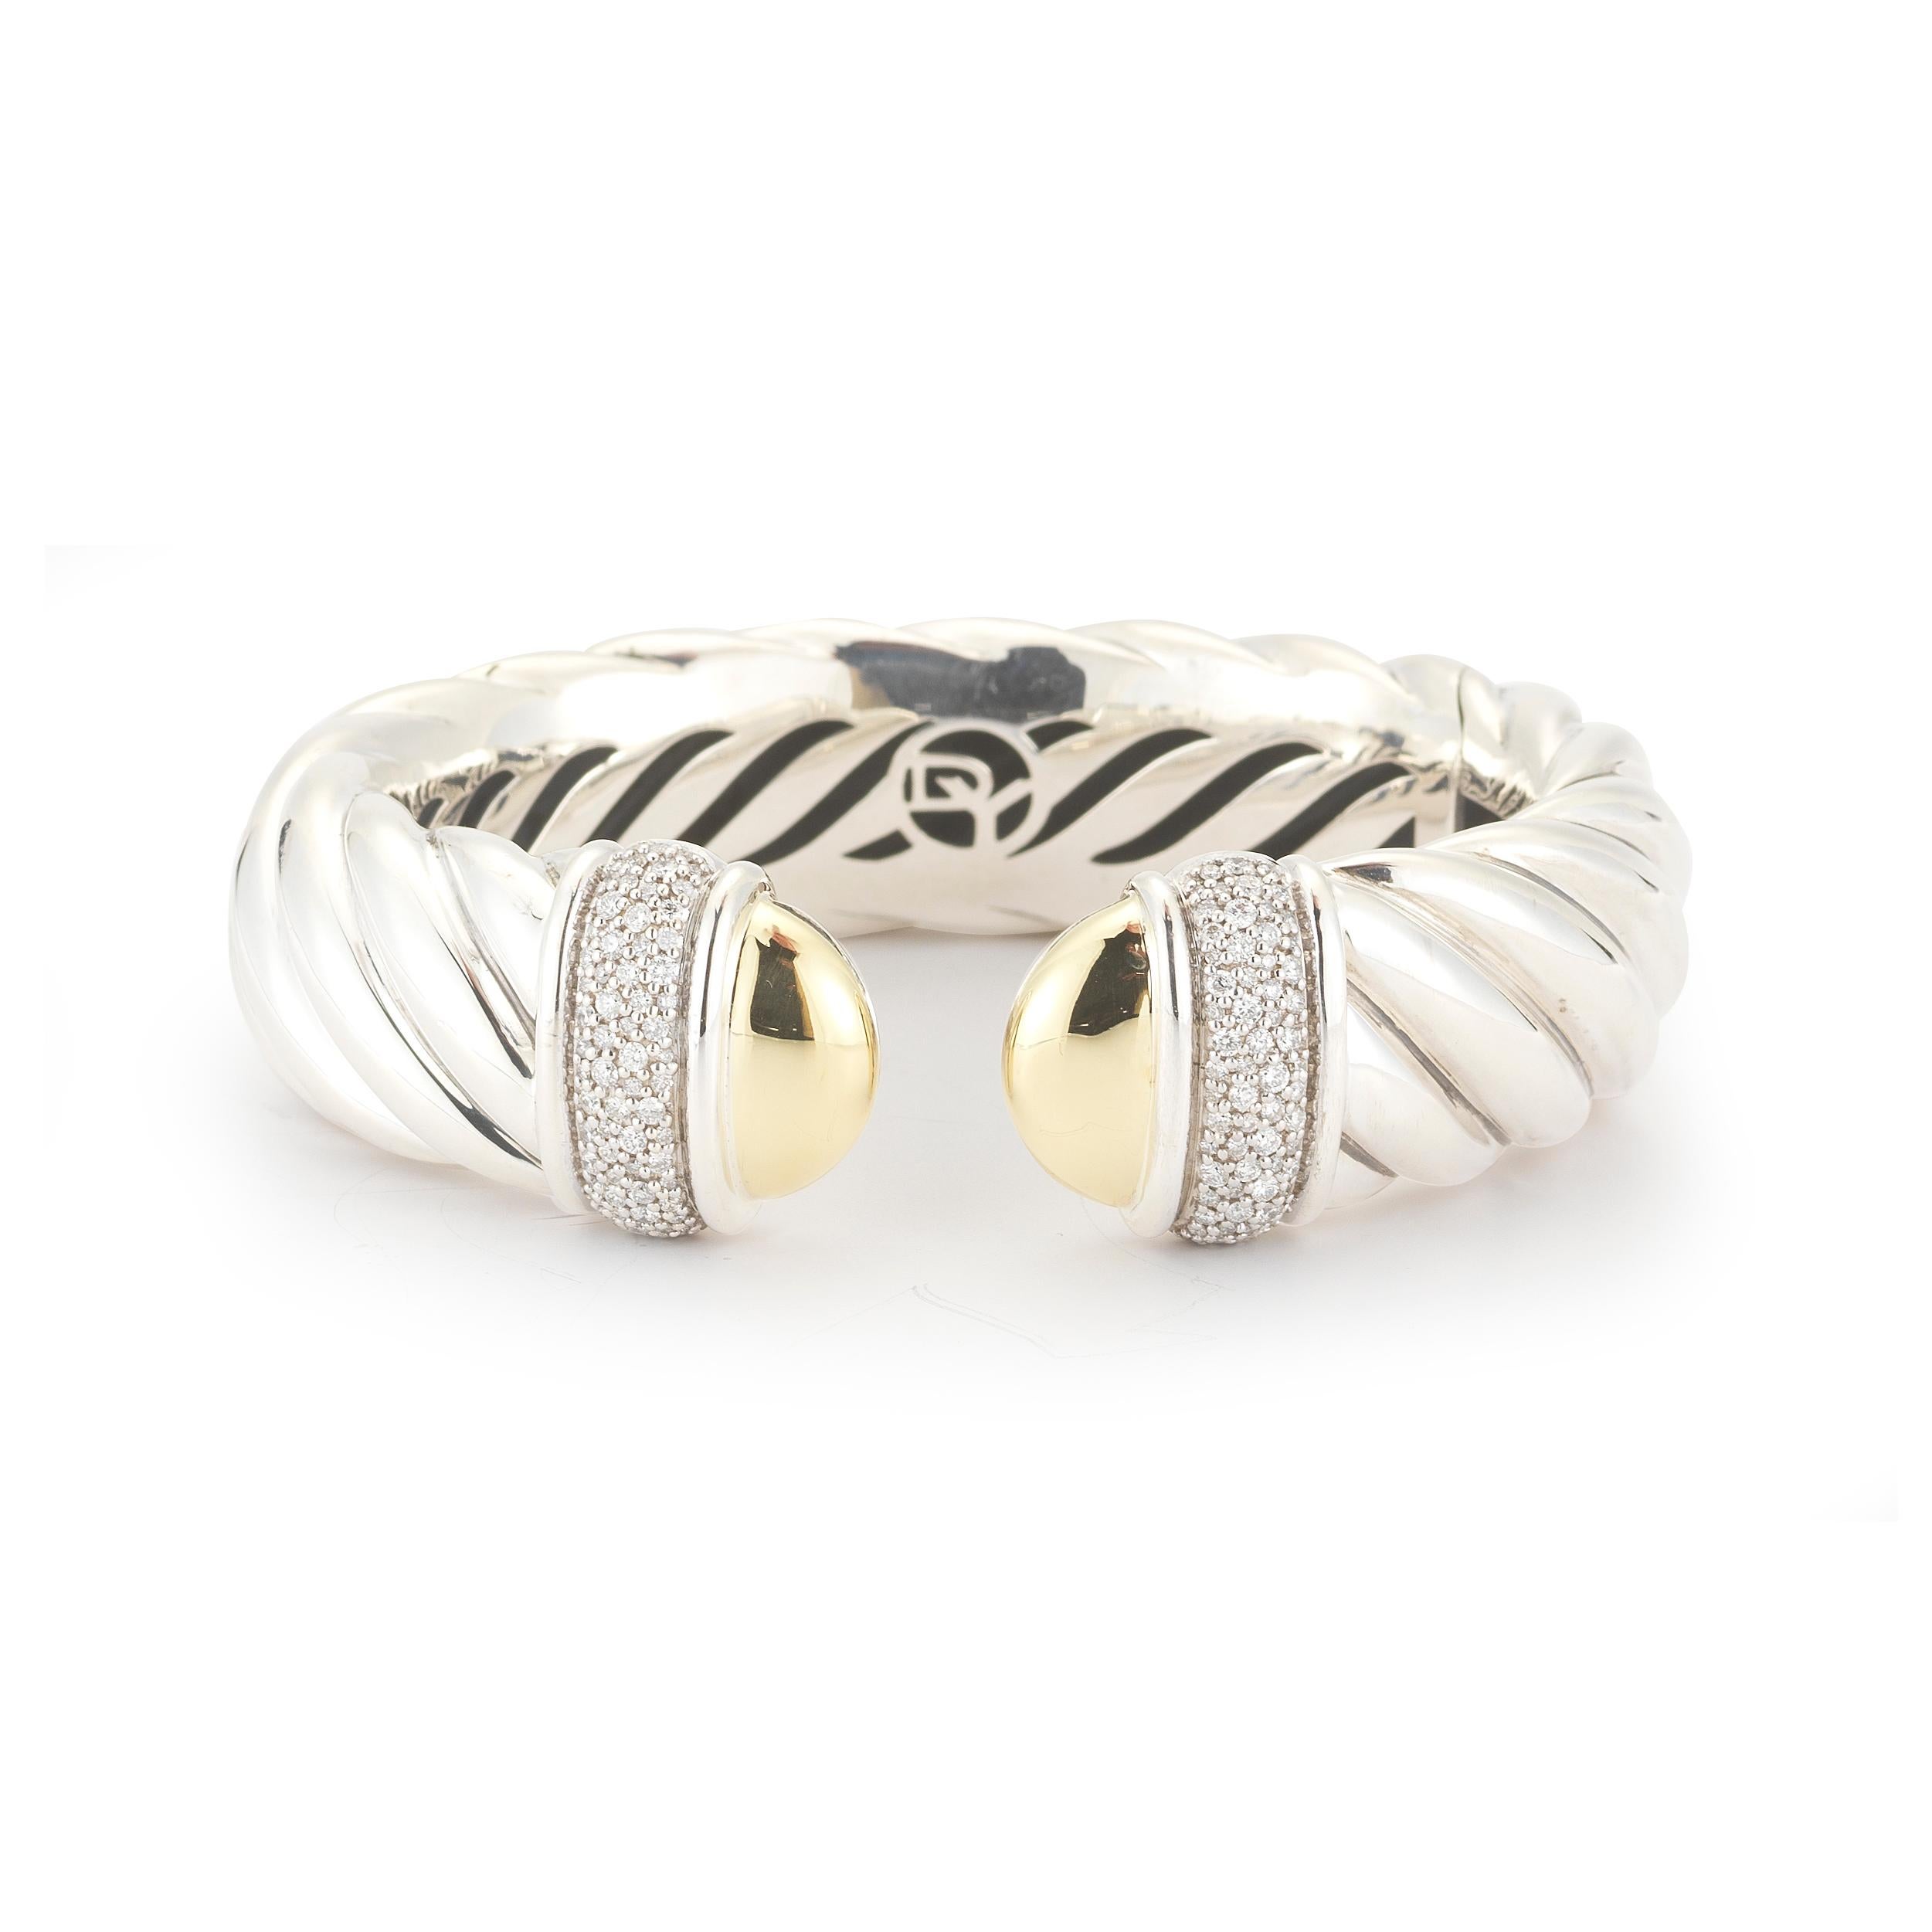 A hinged cuff formed in sterling silver with 18K yellow gold accents features a total of approximately 1.19 carats of round diamonds signed DY, 925, 750. From the David Yurman Waverly Collection. The bracelet measures approximately 18mm in width